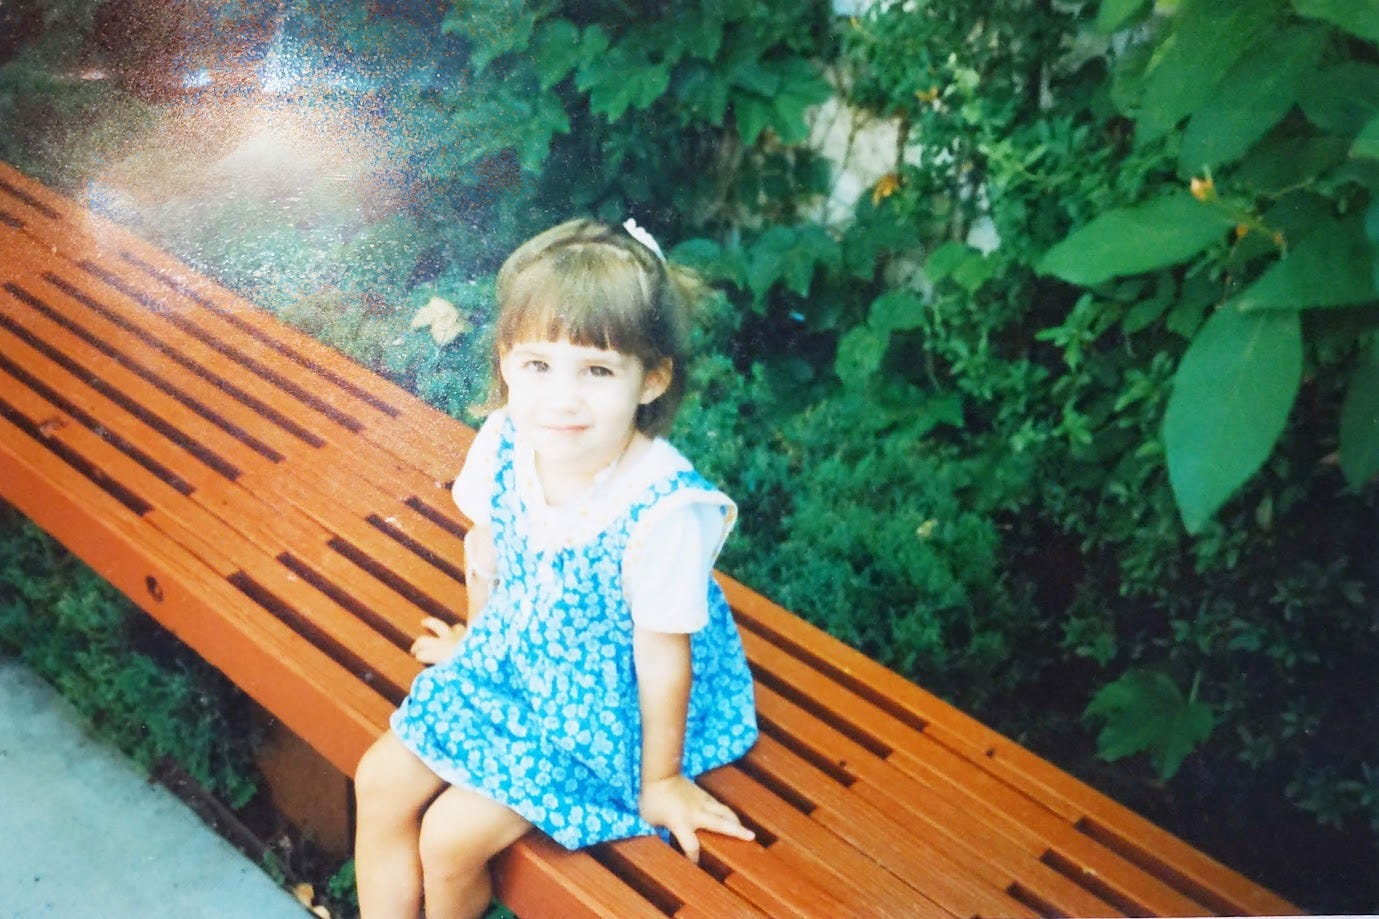 A very tiny Isa, around 5 or 6 years old, sits in her grandmother's backyard. She's wearing a blue dress.